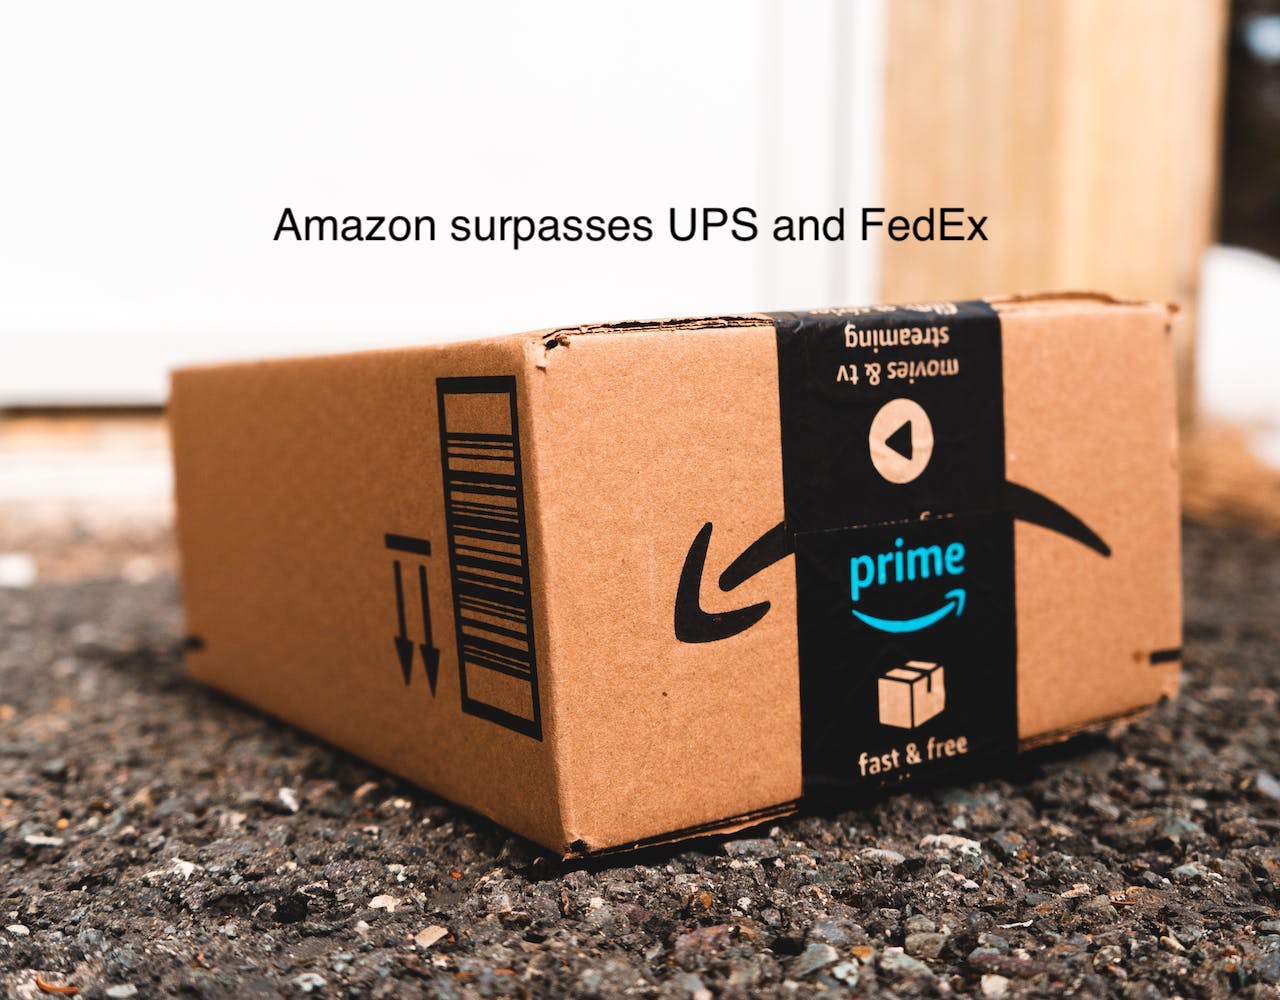 Amazon surpasses UPS and FedEx as largest delivery company